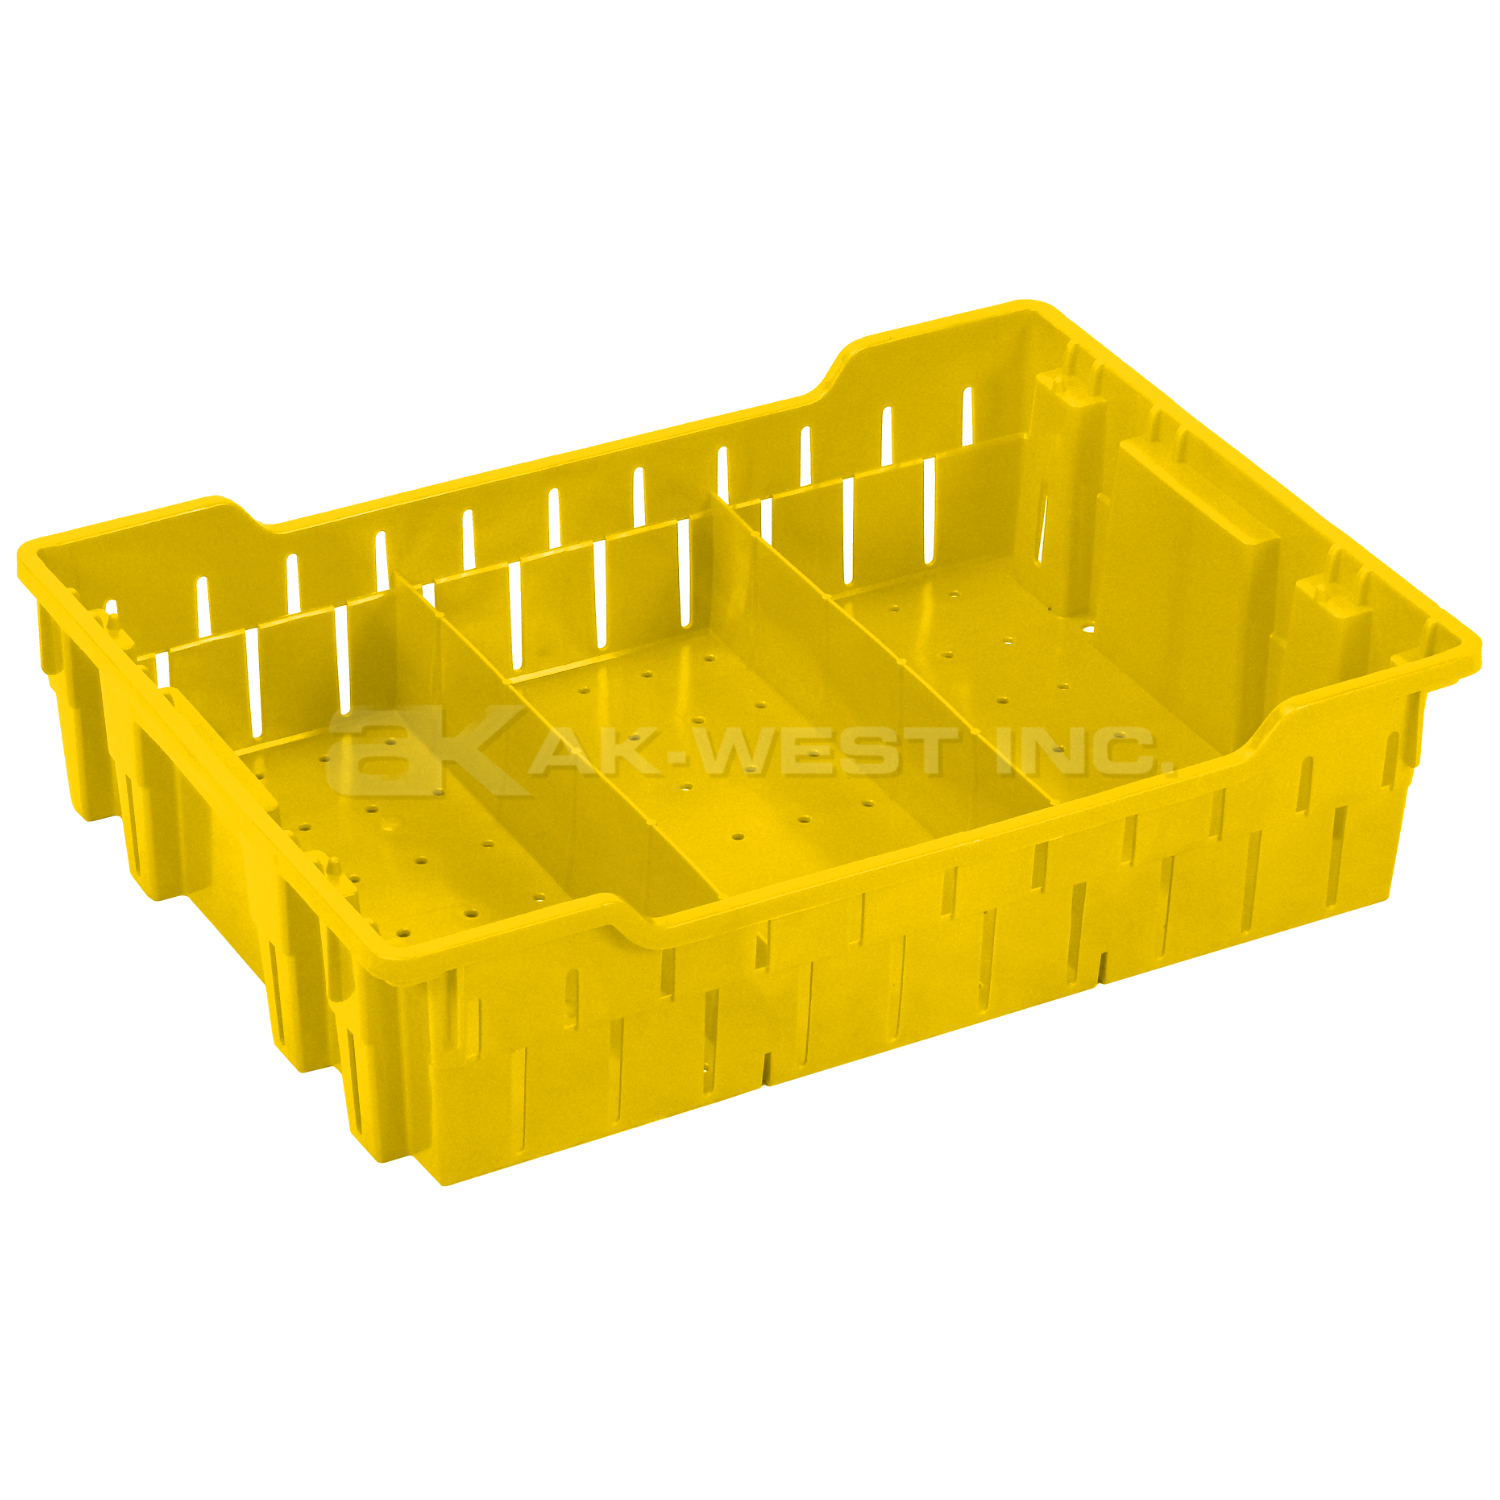 Yellow, 19"L x 13"W x 5"H Stack and Nest Container w/ Vented Sides and Base w/ Dividers